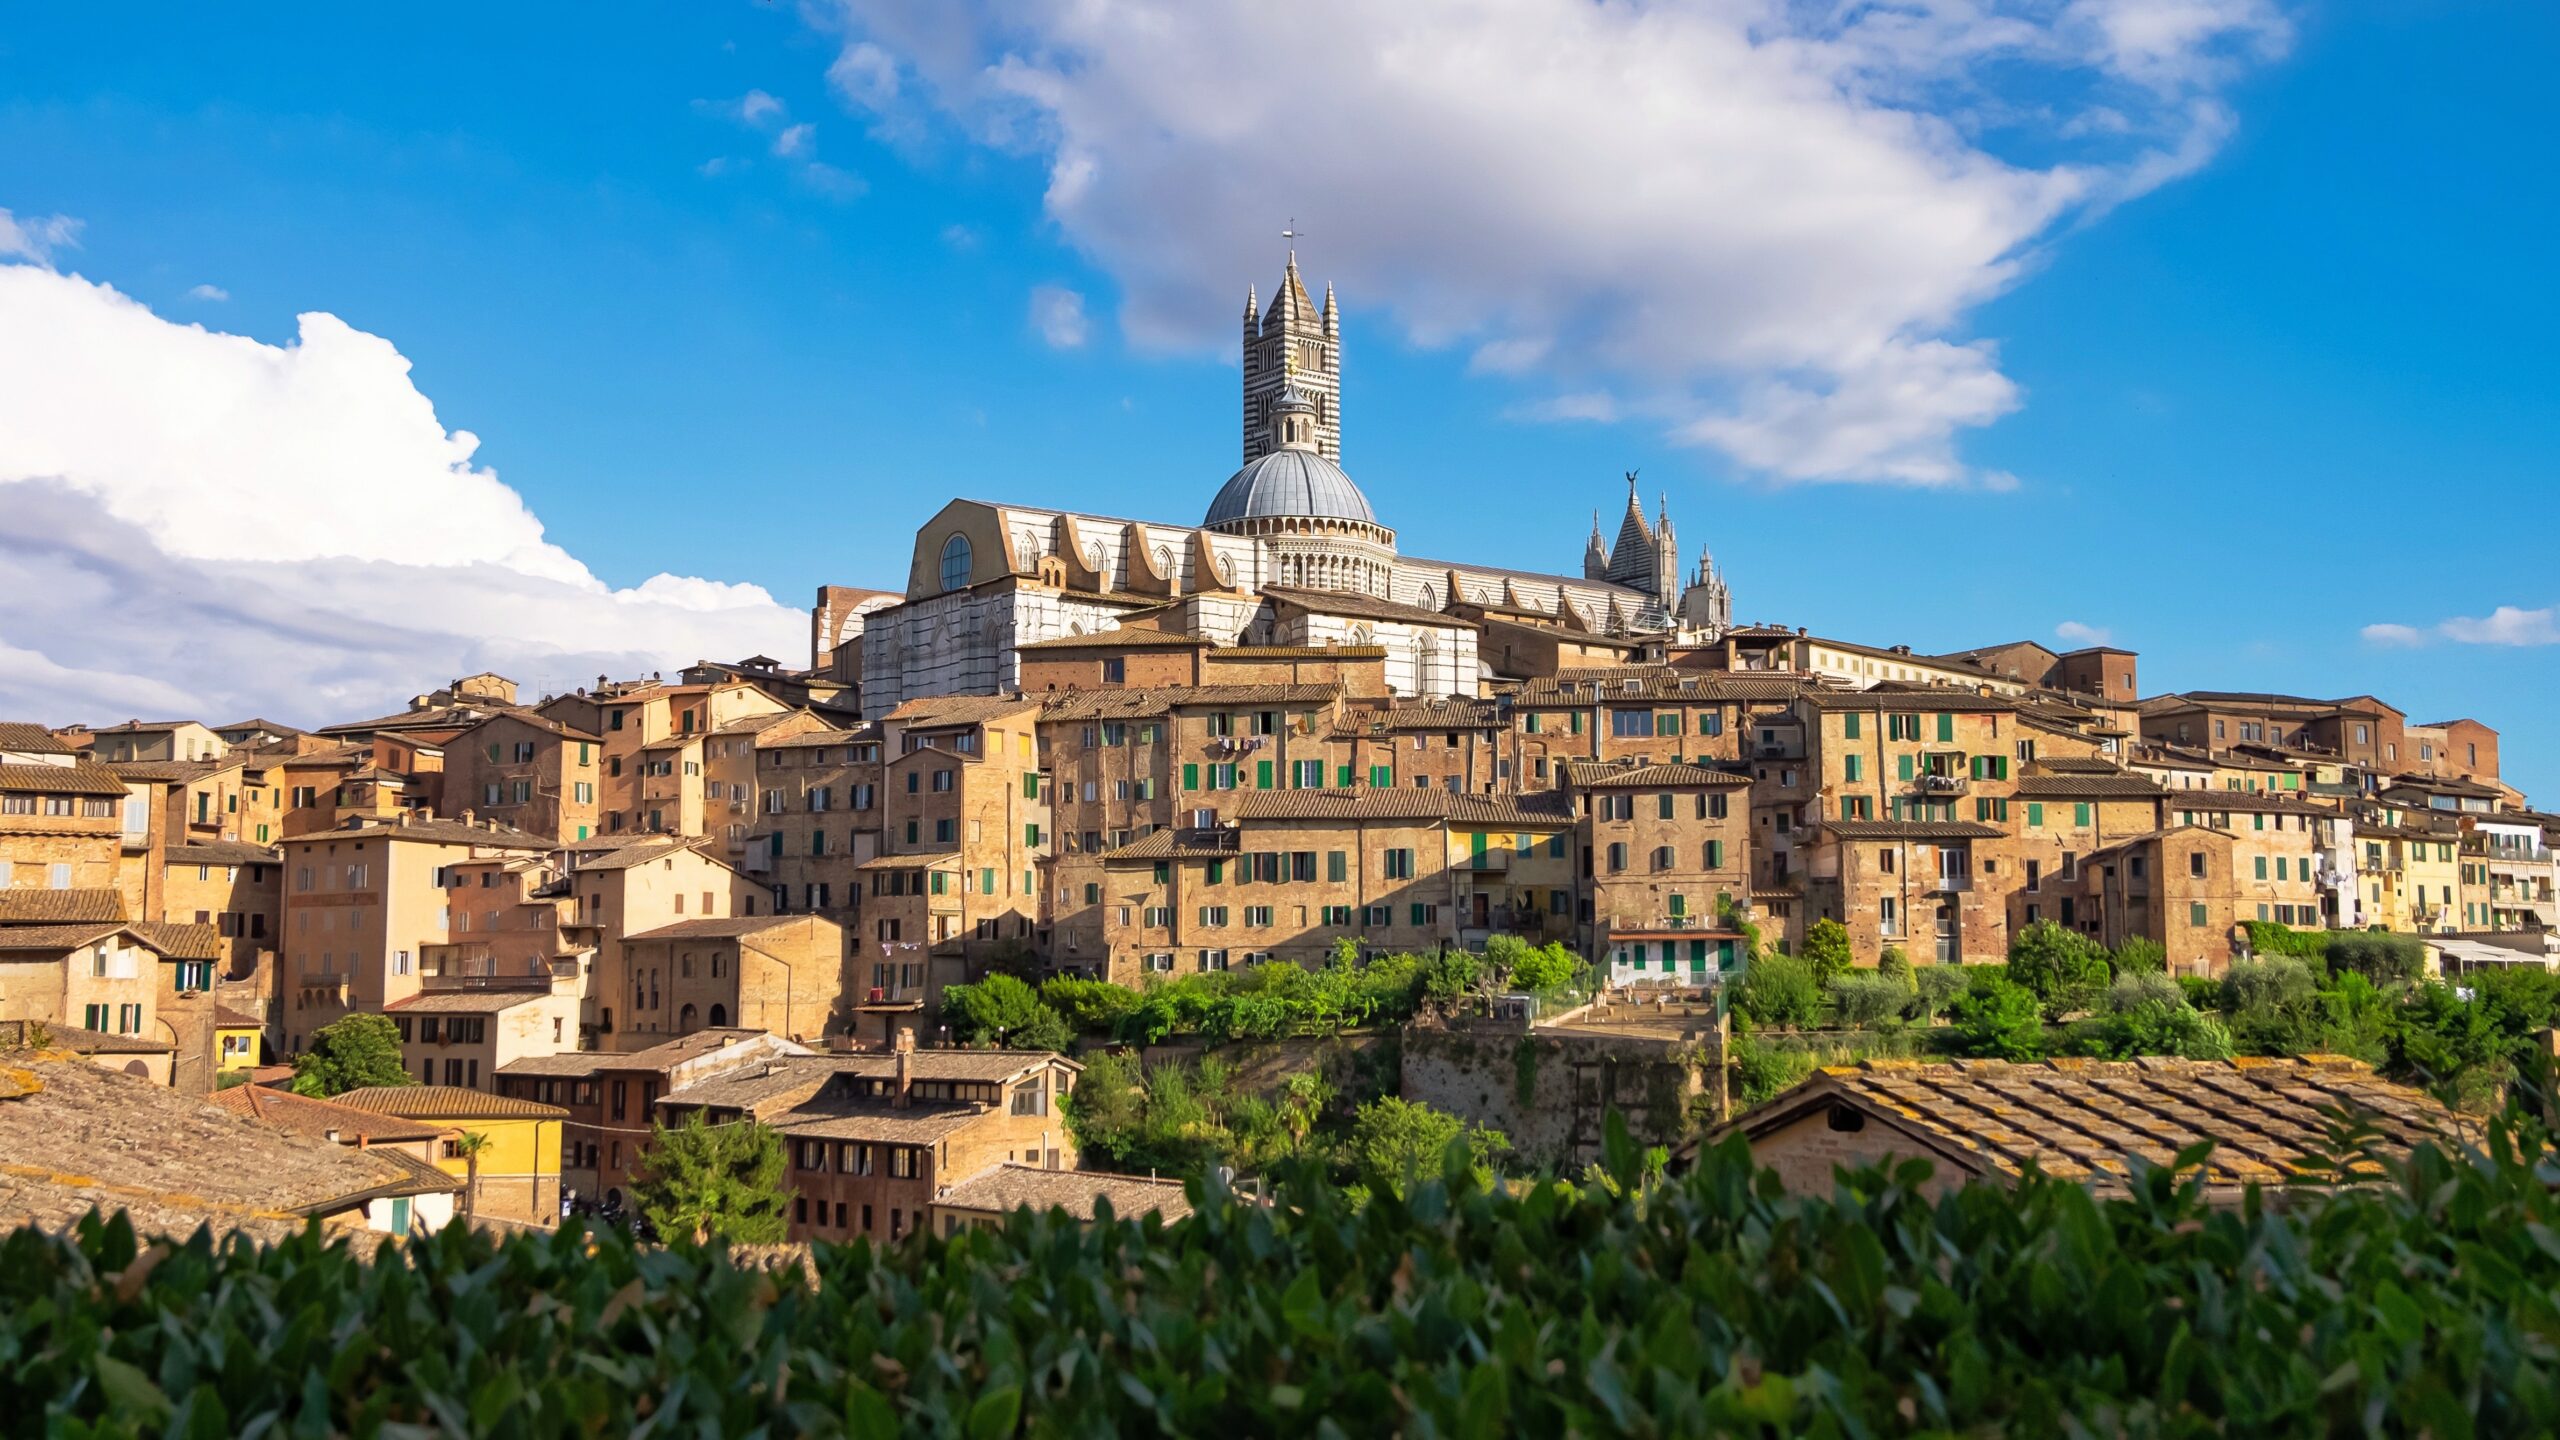 Experience Siena On Our Siena 5 Day City Break Tour Package